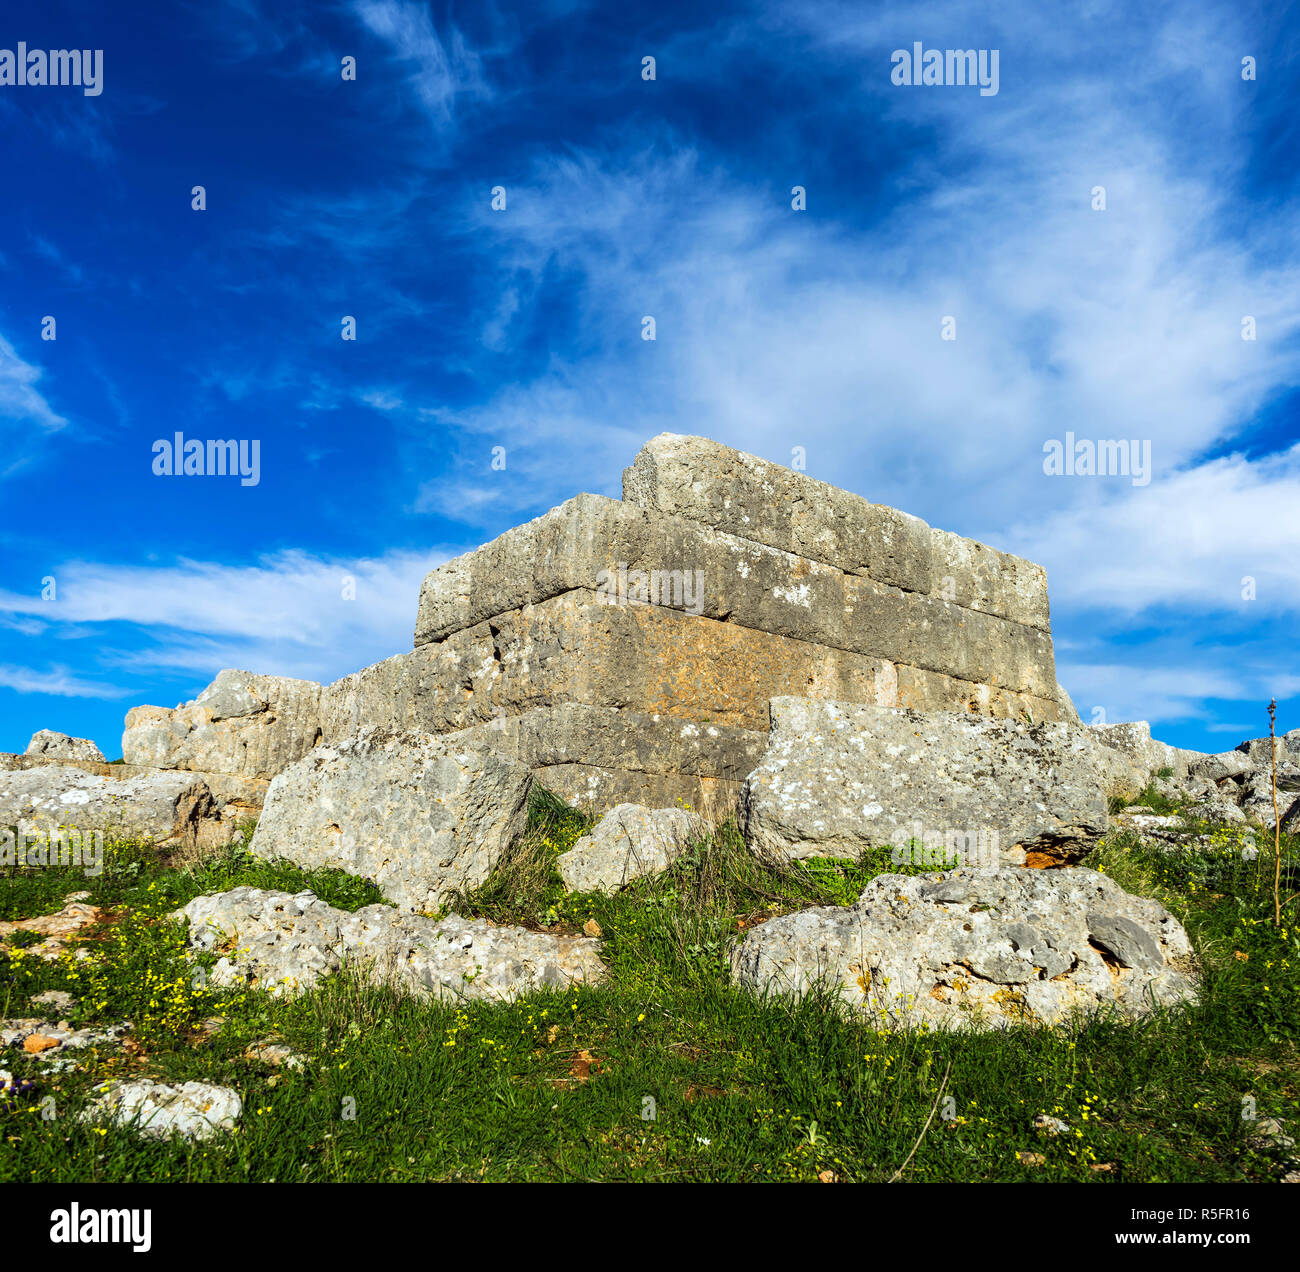 the ruins of the ancient Greek city Plataea Stock Photo